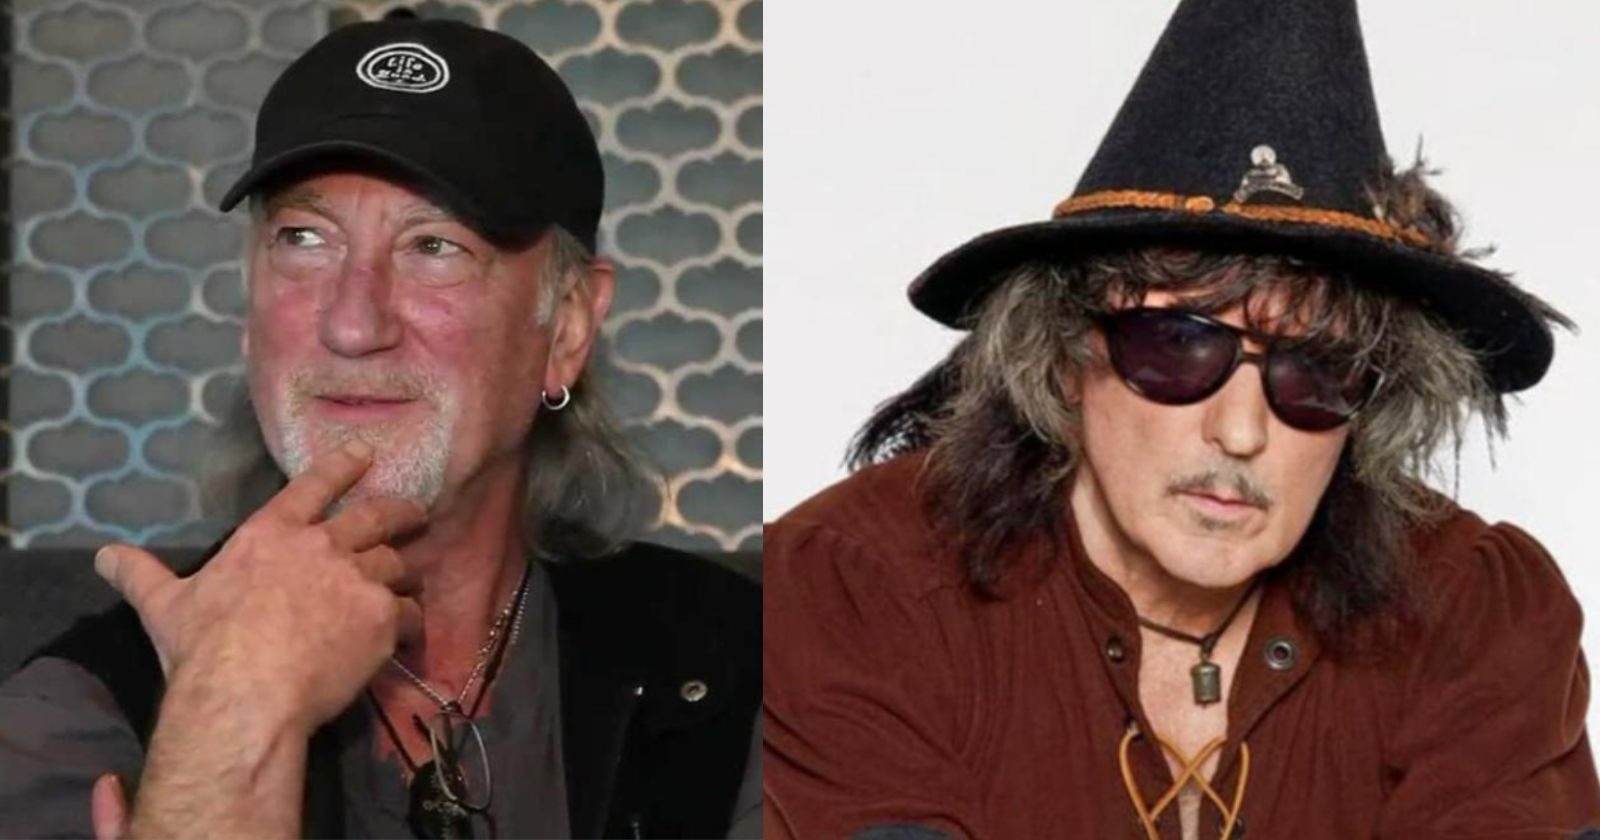 Roger Glover Ritchie Blackmore